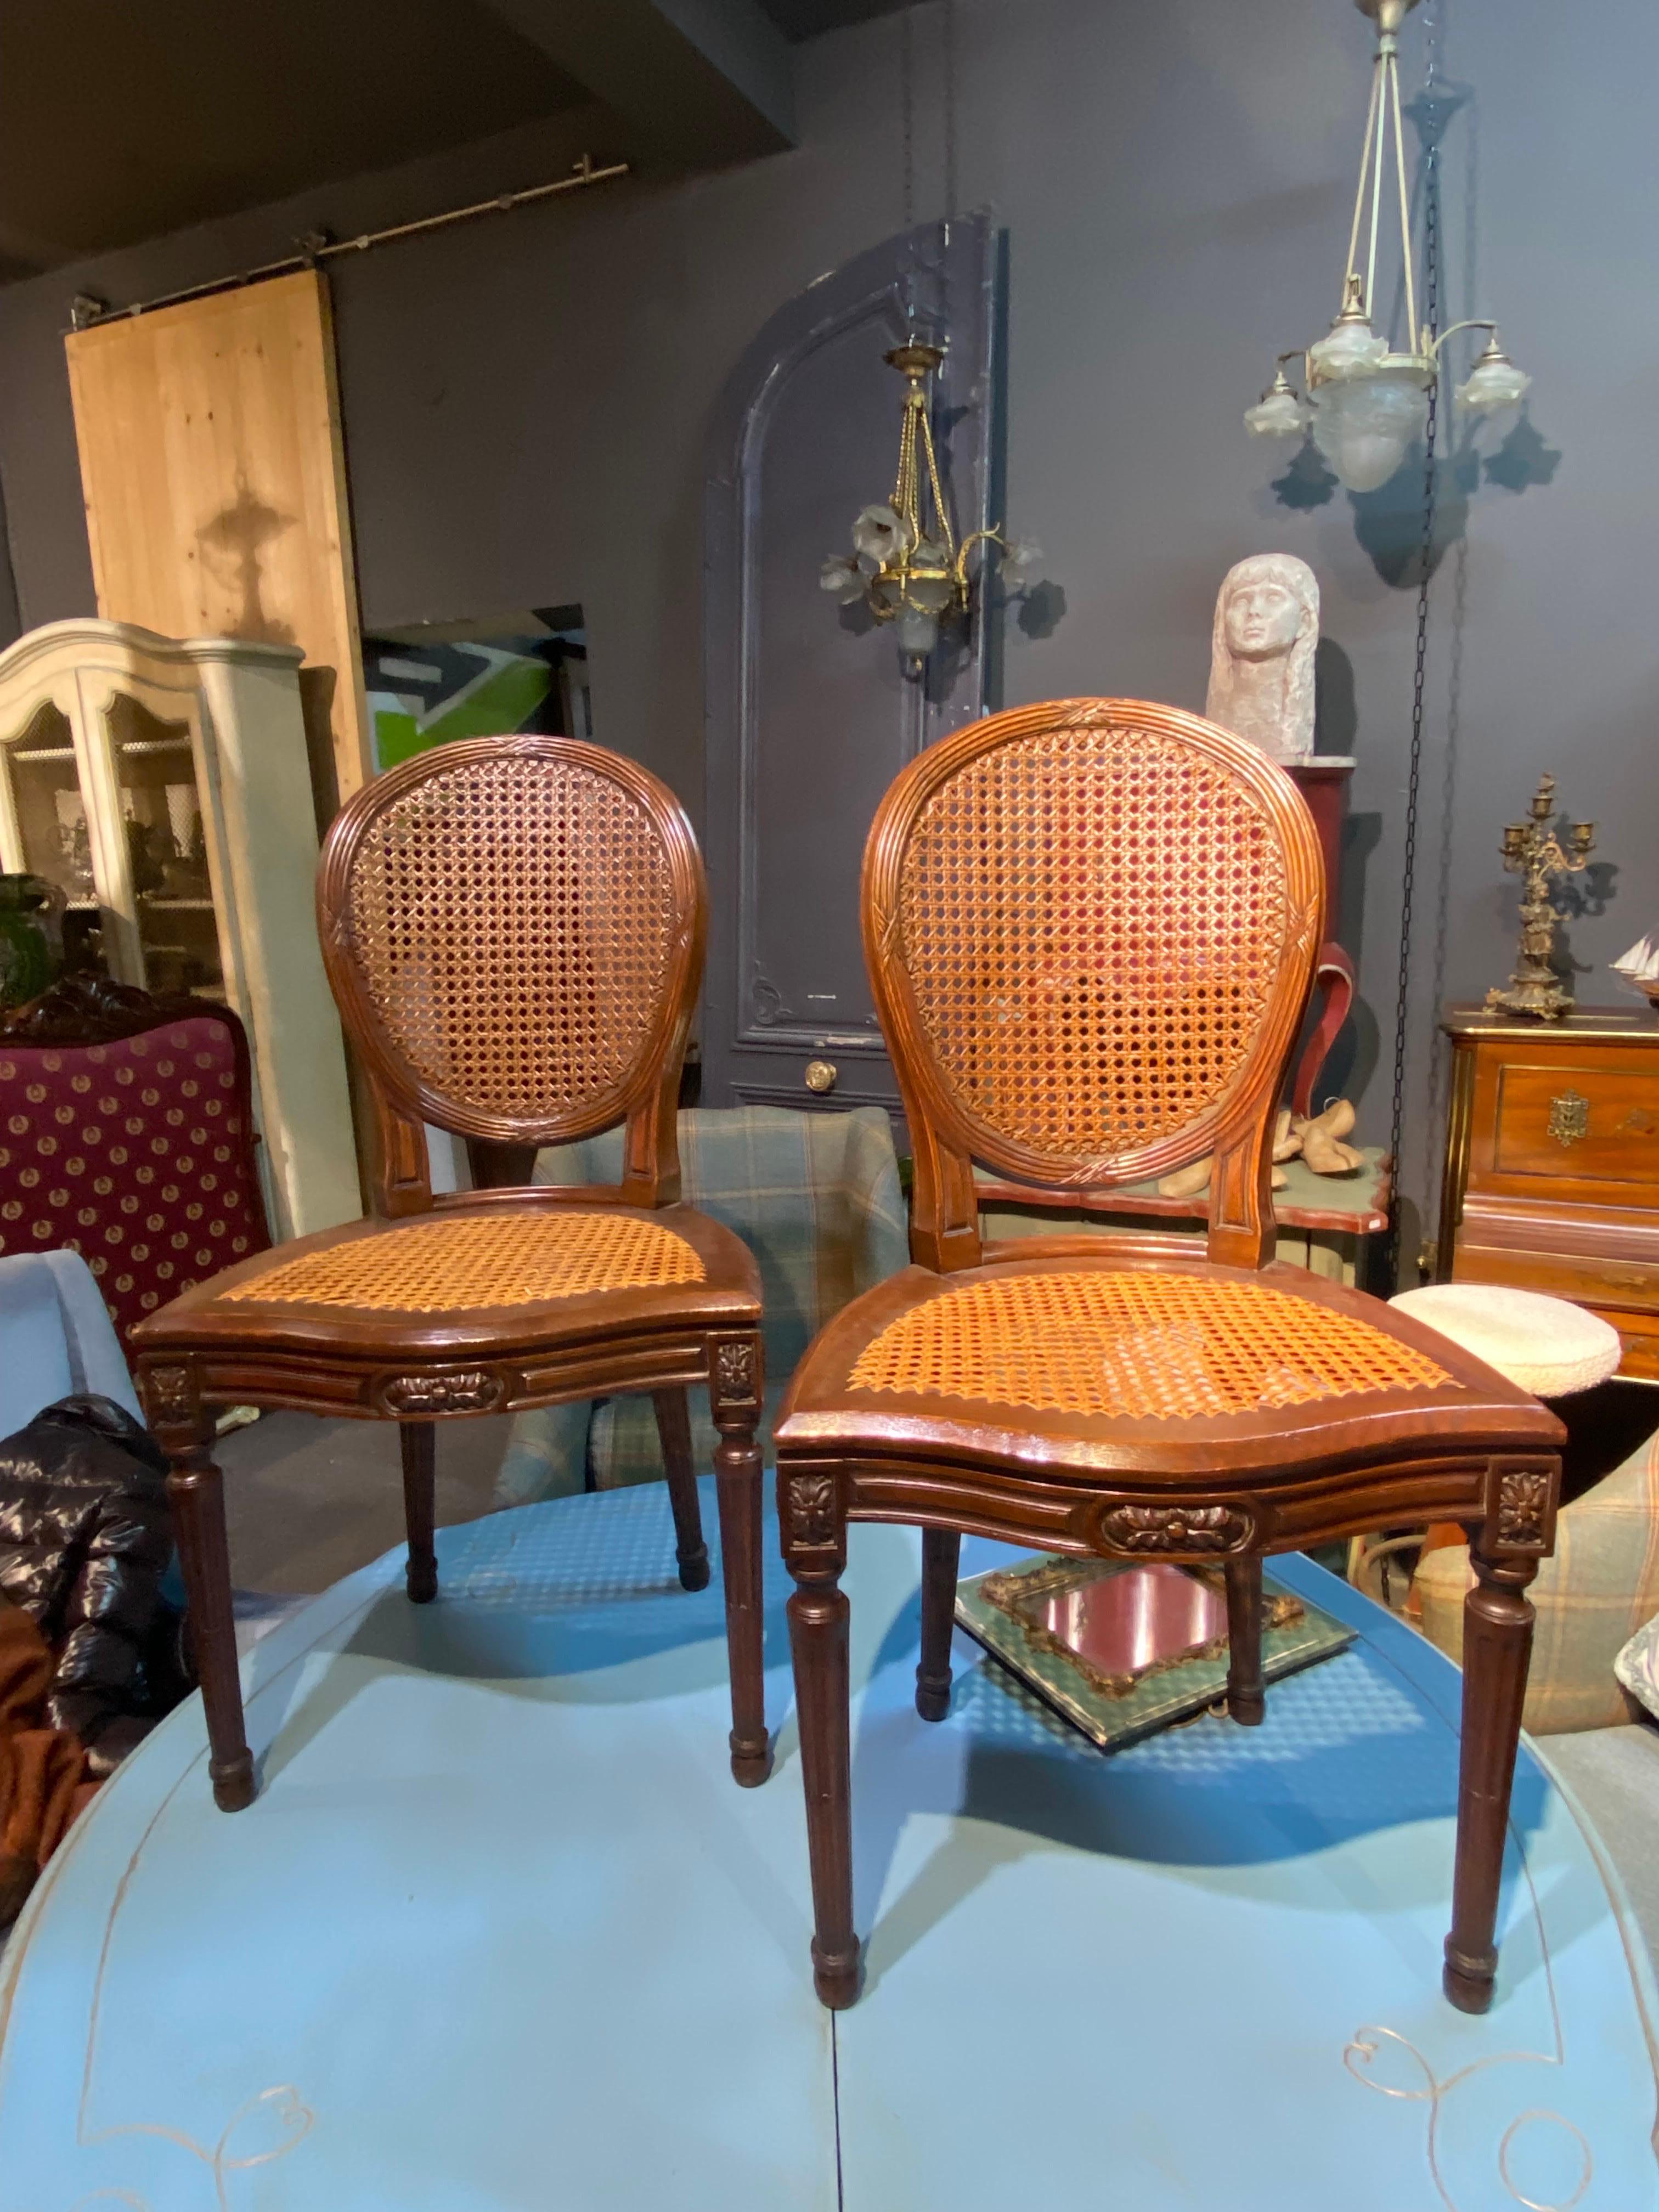 Six 19th century French carved walnut dining chairs in Louis XVI style, with hand-caned seats and backs. The chairs are raised on elegantly carved legs. All six are very stable as construction and the cane is in very good condition. Please note that